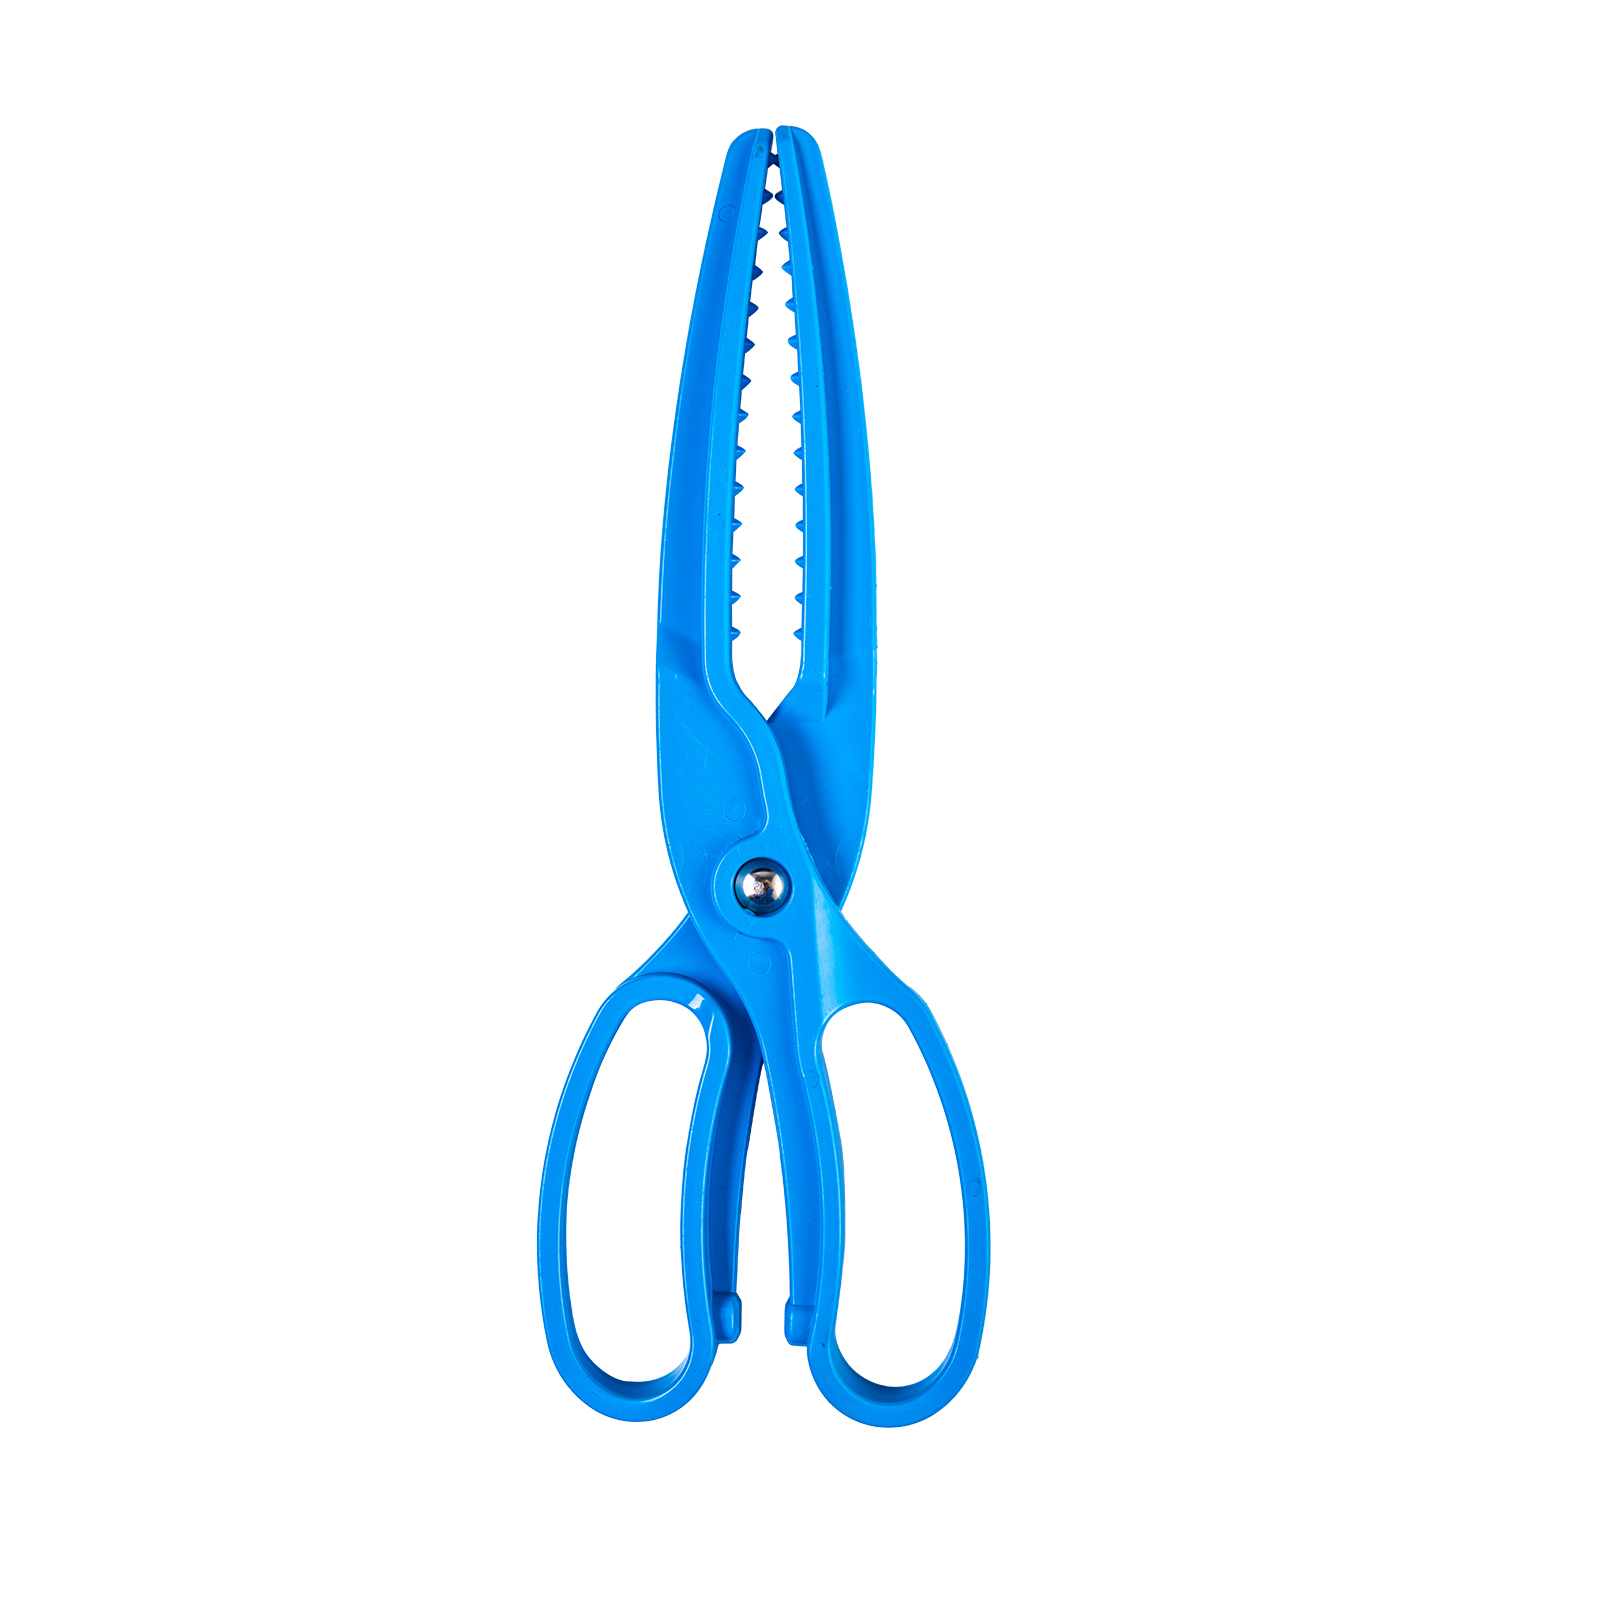 Fish Body Holder Tongs,Fishing Pliers ABS Fish ABS Fishing Pliers